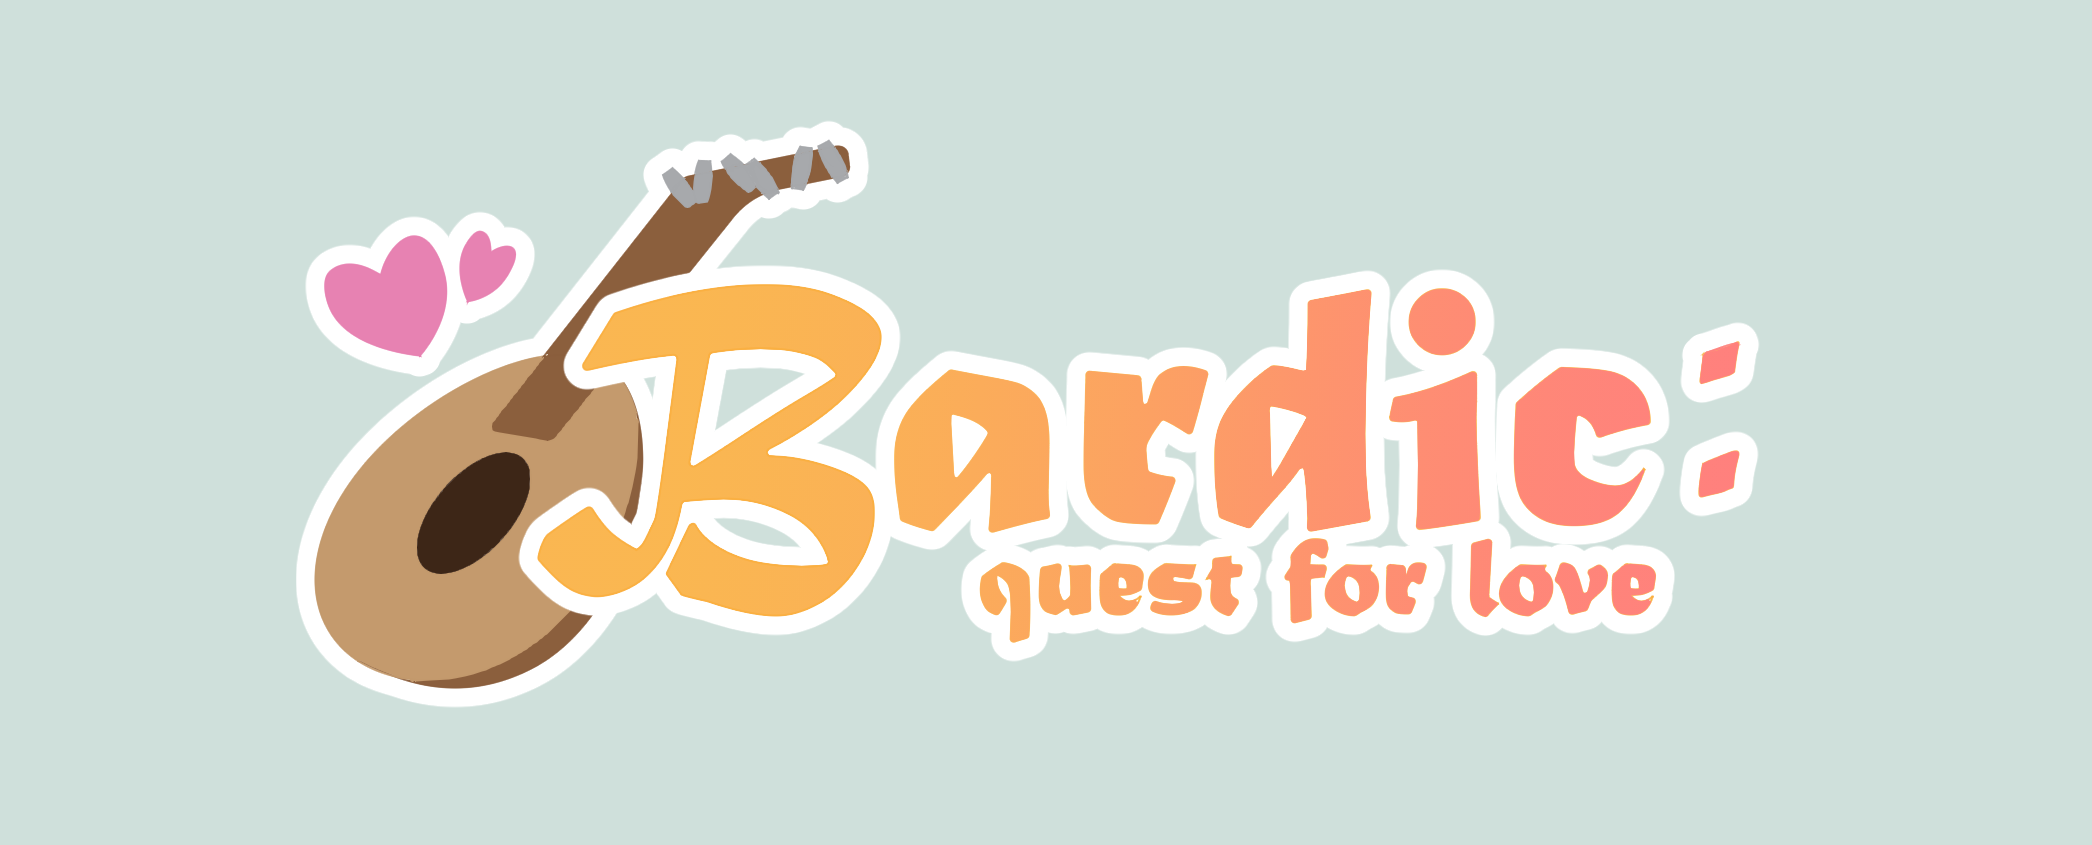 Bardic: Quest for Love